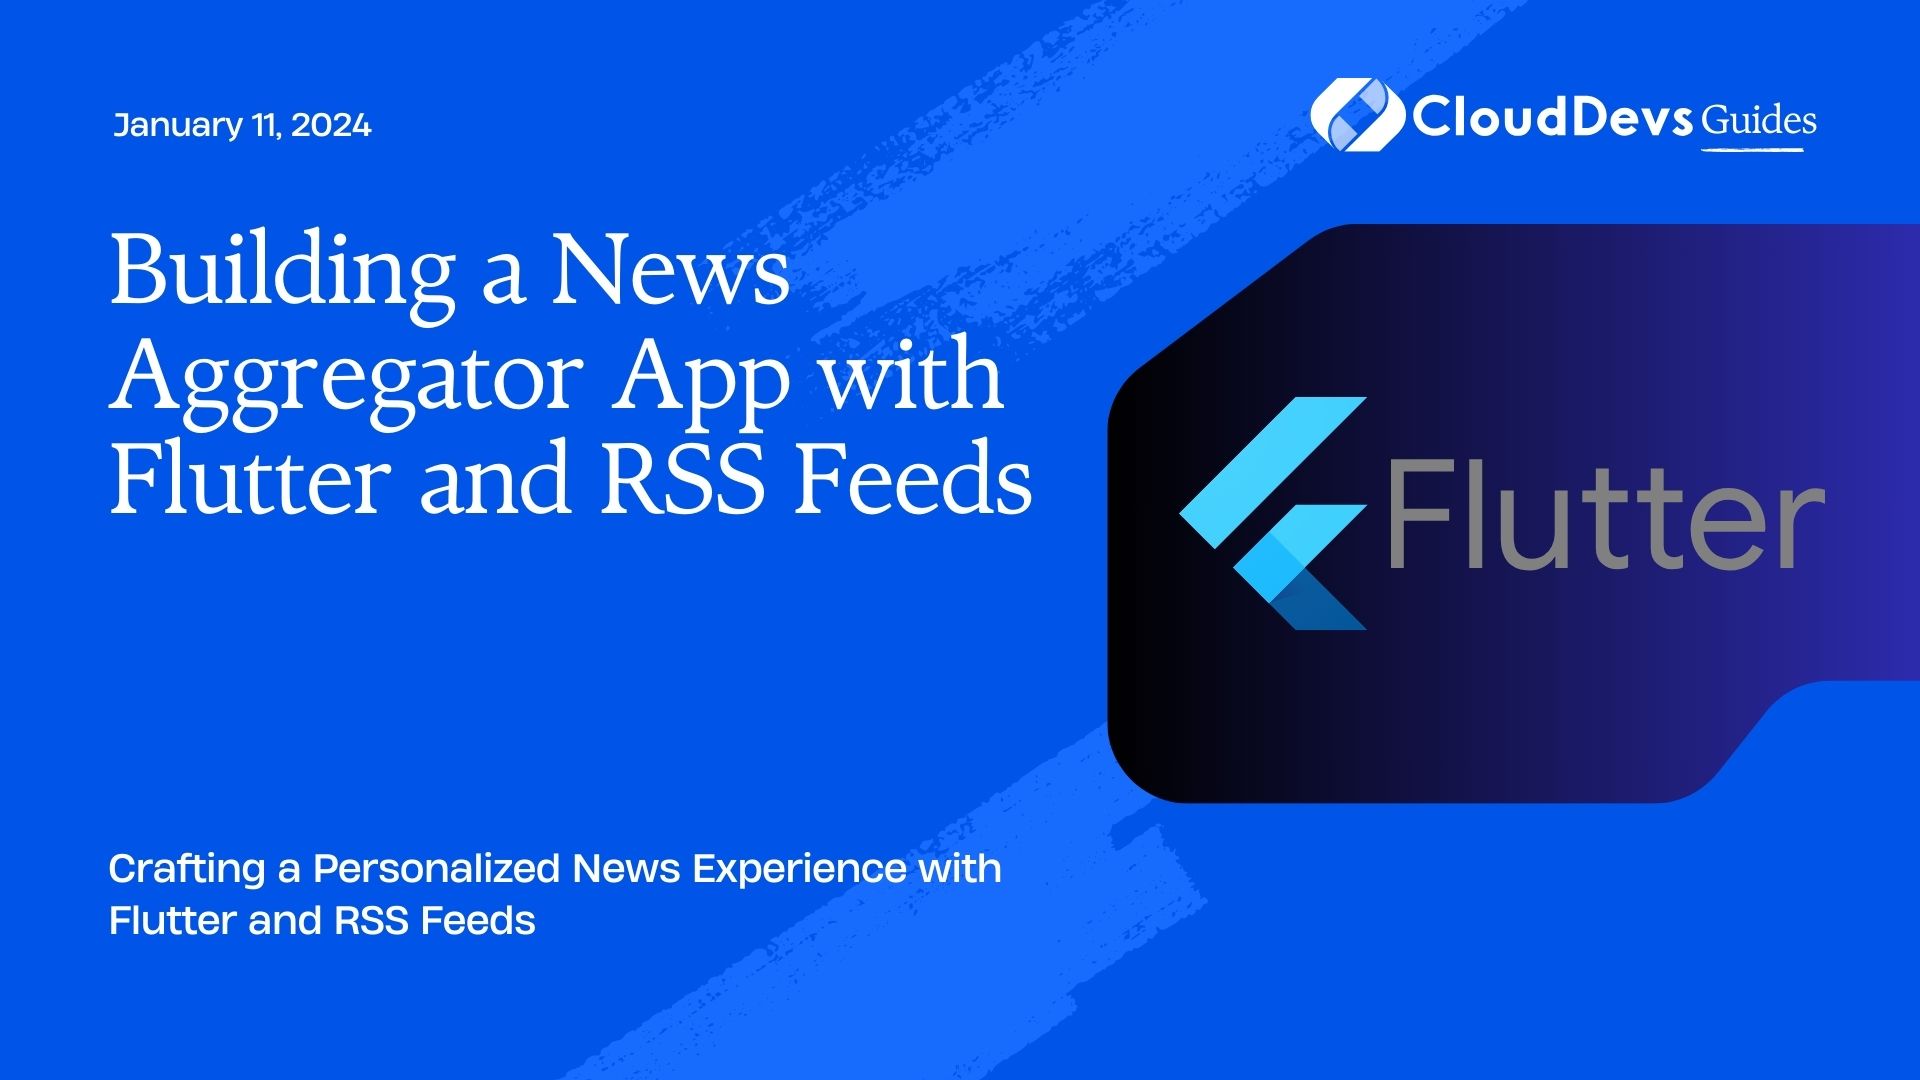 Building a News Aggregator App with Flutter and RSS Feeds